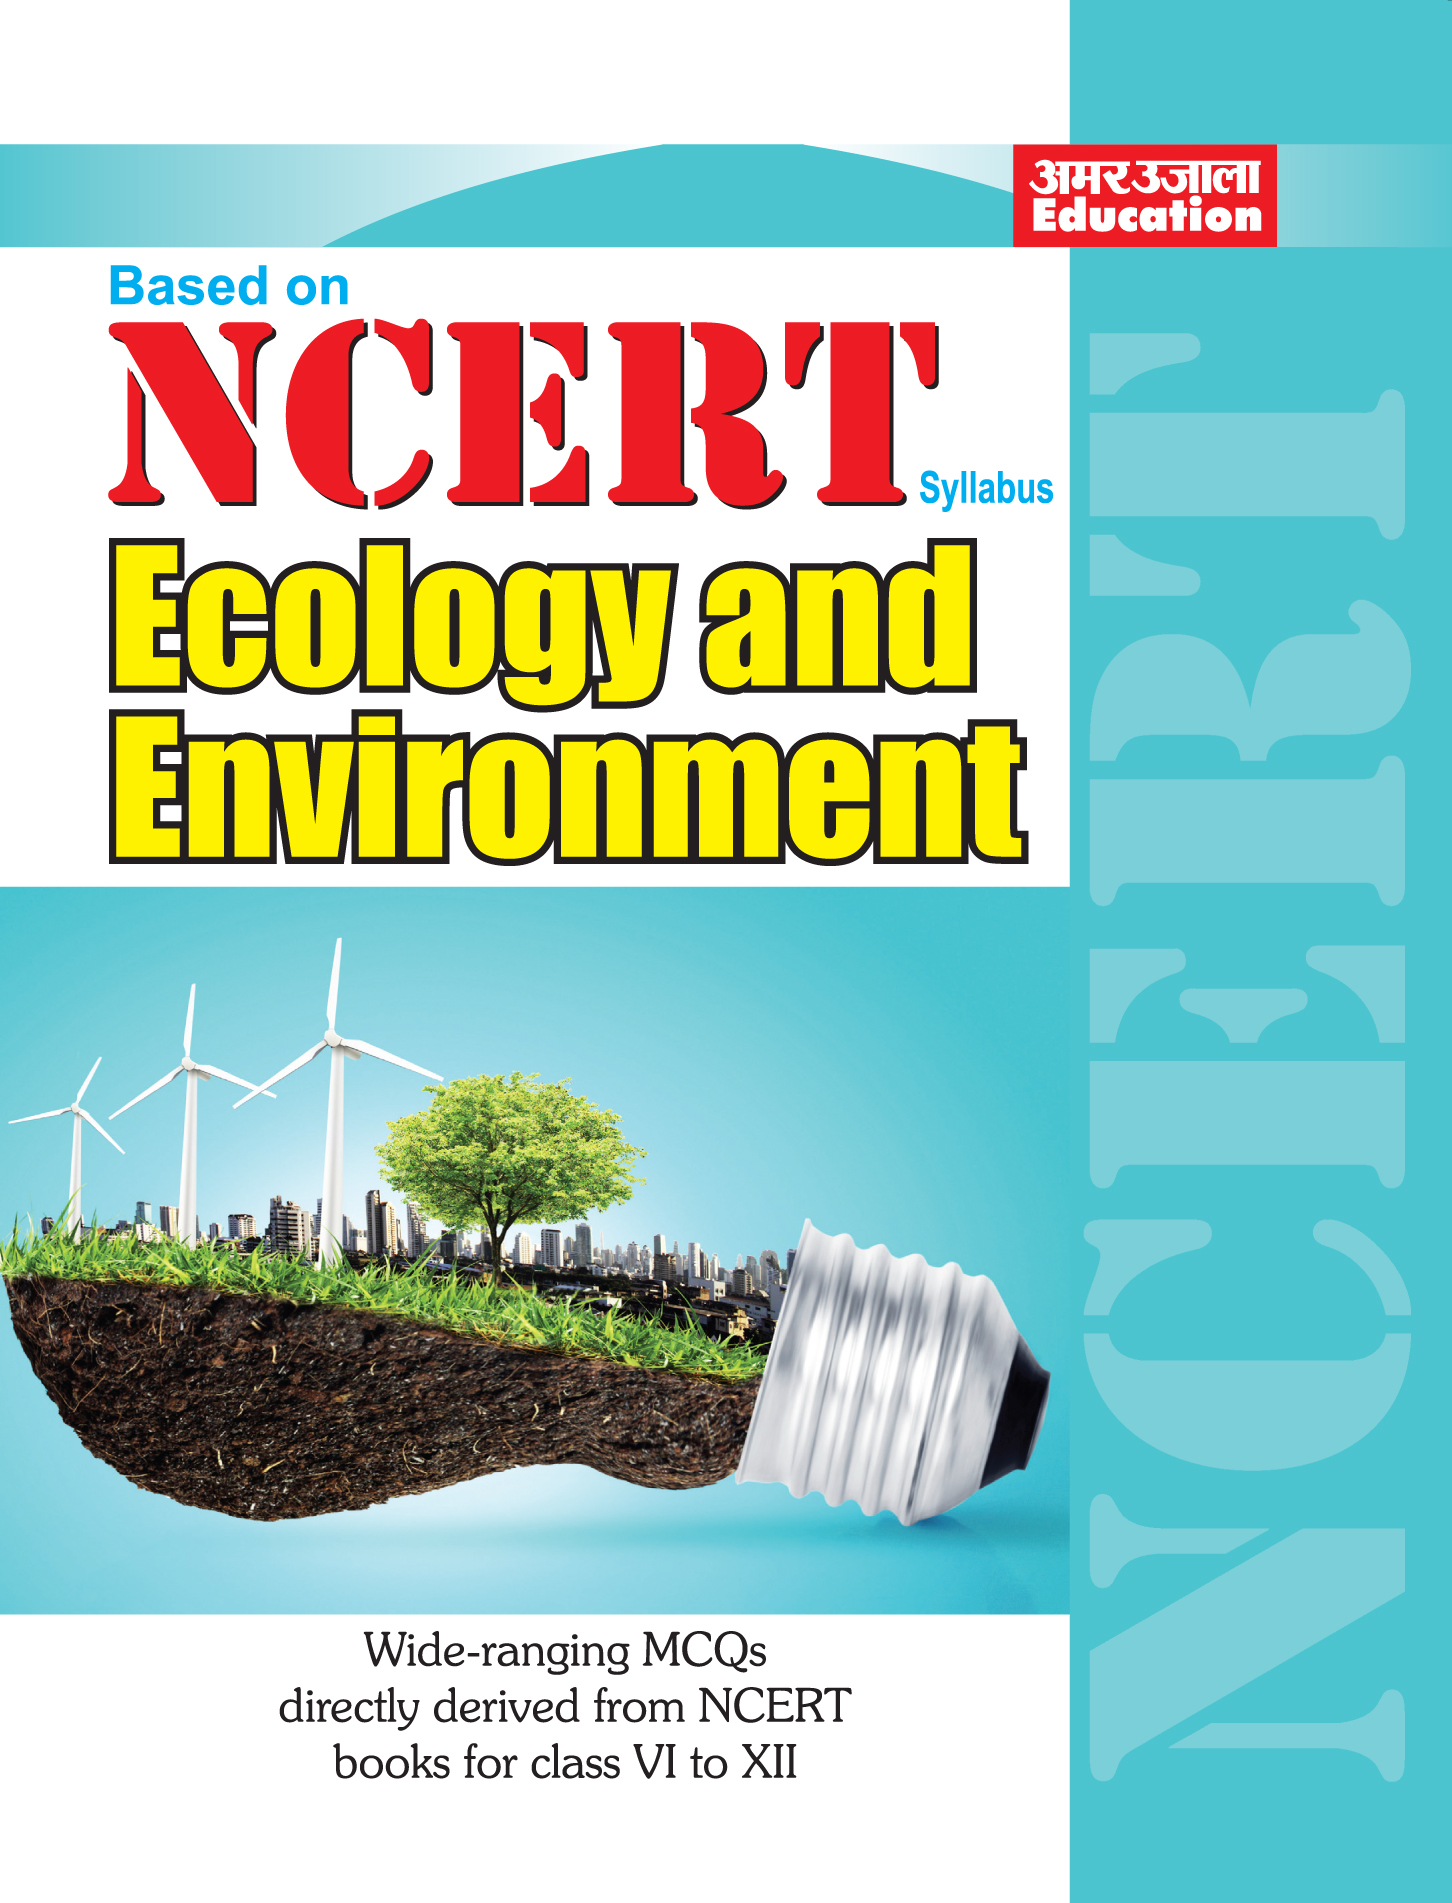 NCERT Ecology and Environment